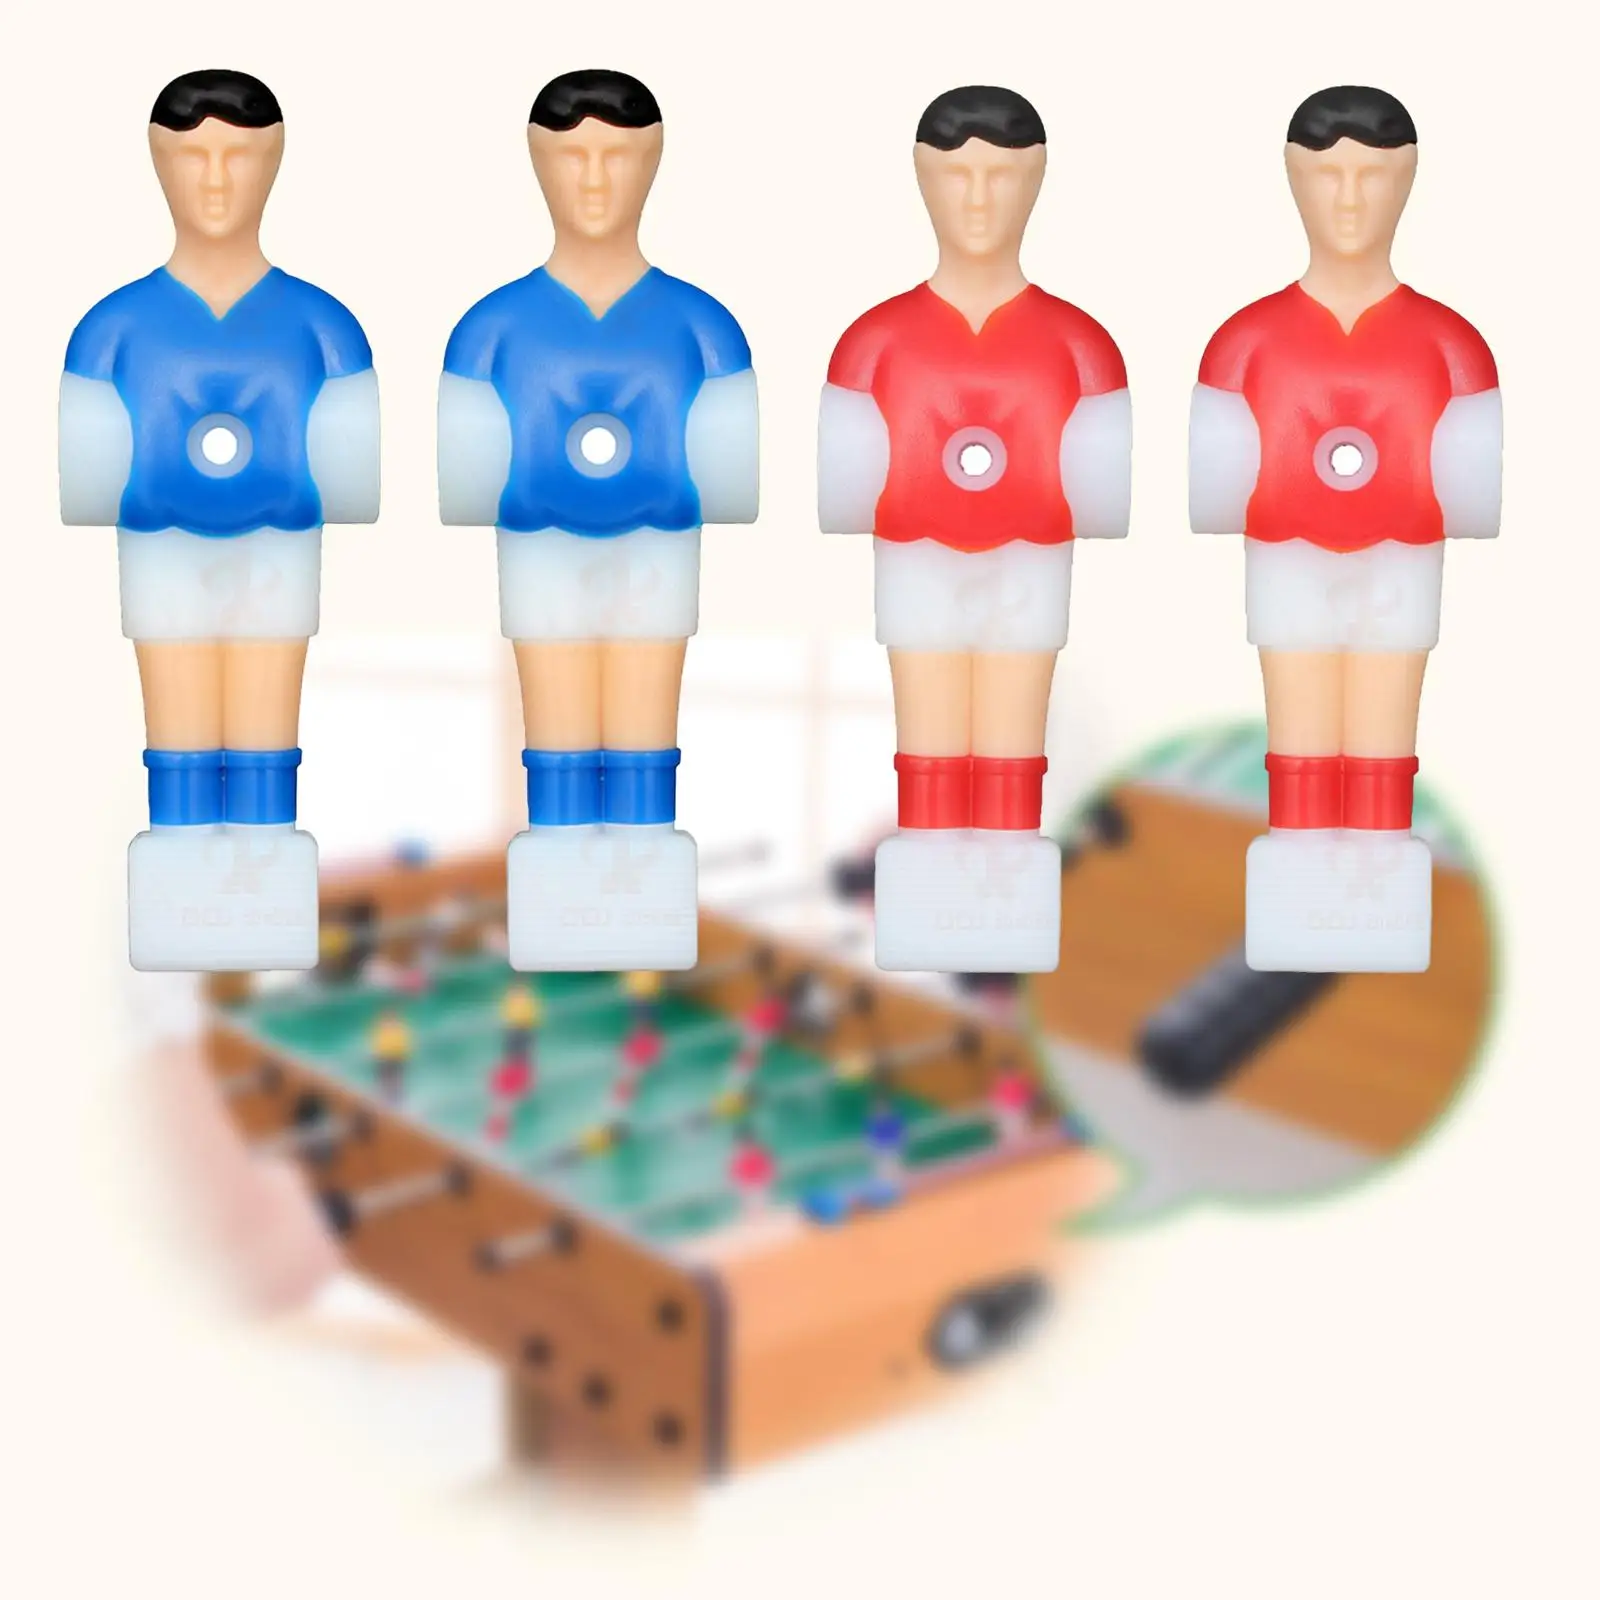 4Pcs Mini Doll Table Football Men Replacement Soccer Table Player Football Players Figures Toys Table Football Player Accessory professional captain armband 1pc colorful football soccer flexible sports adjustable player bands football supplies